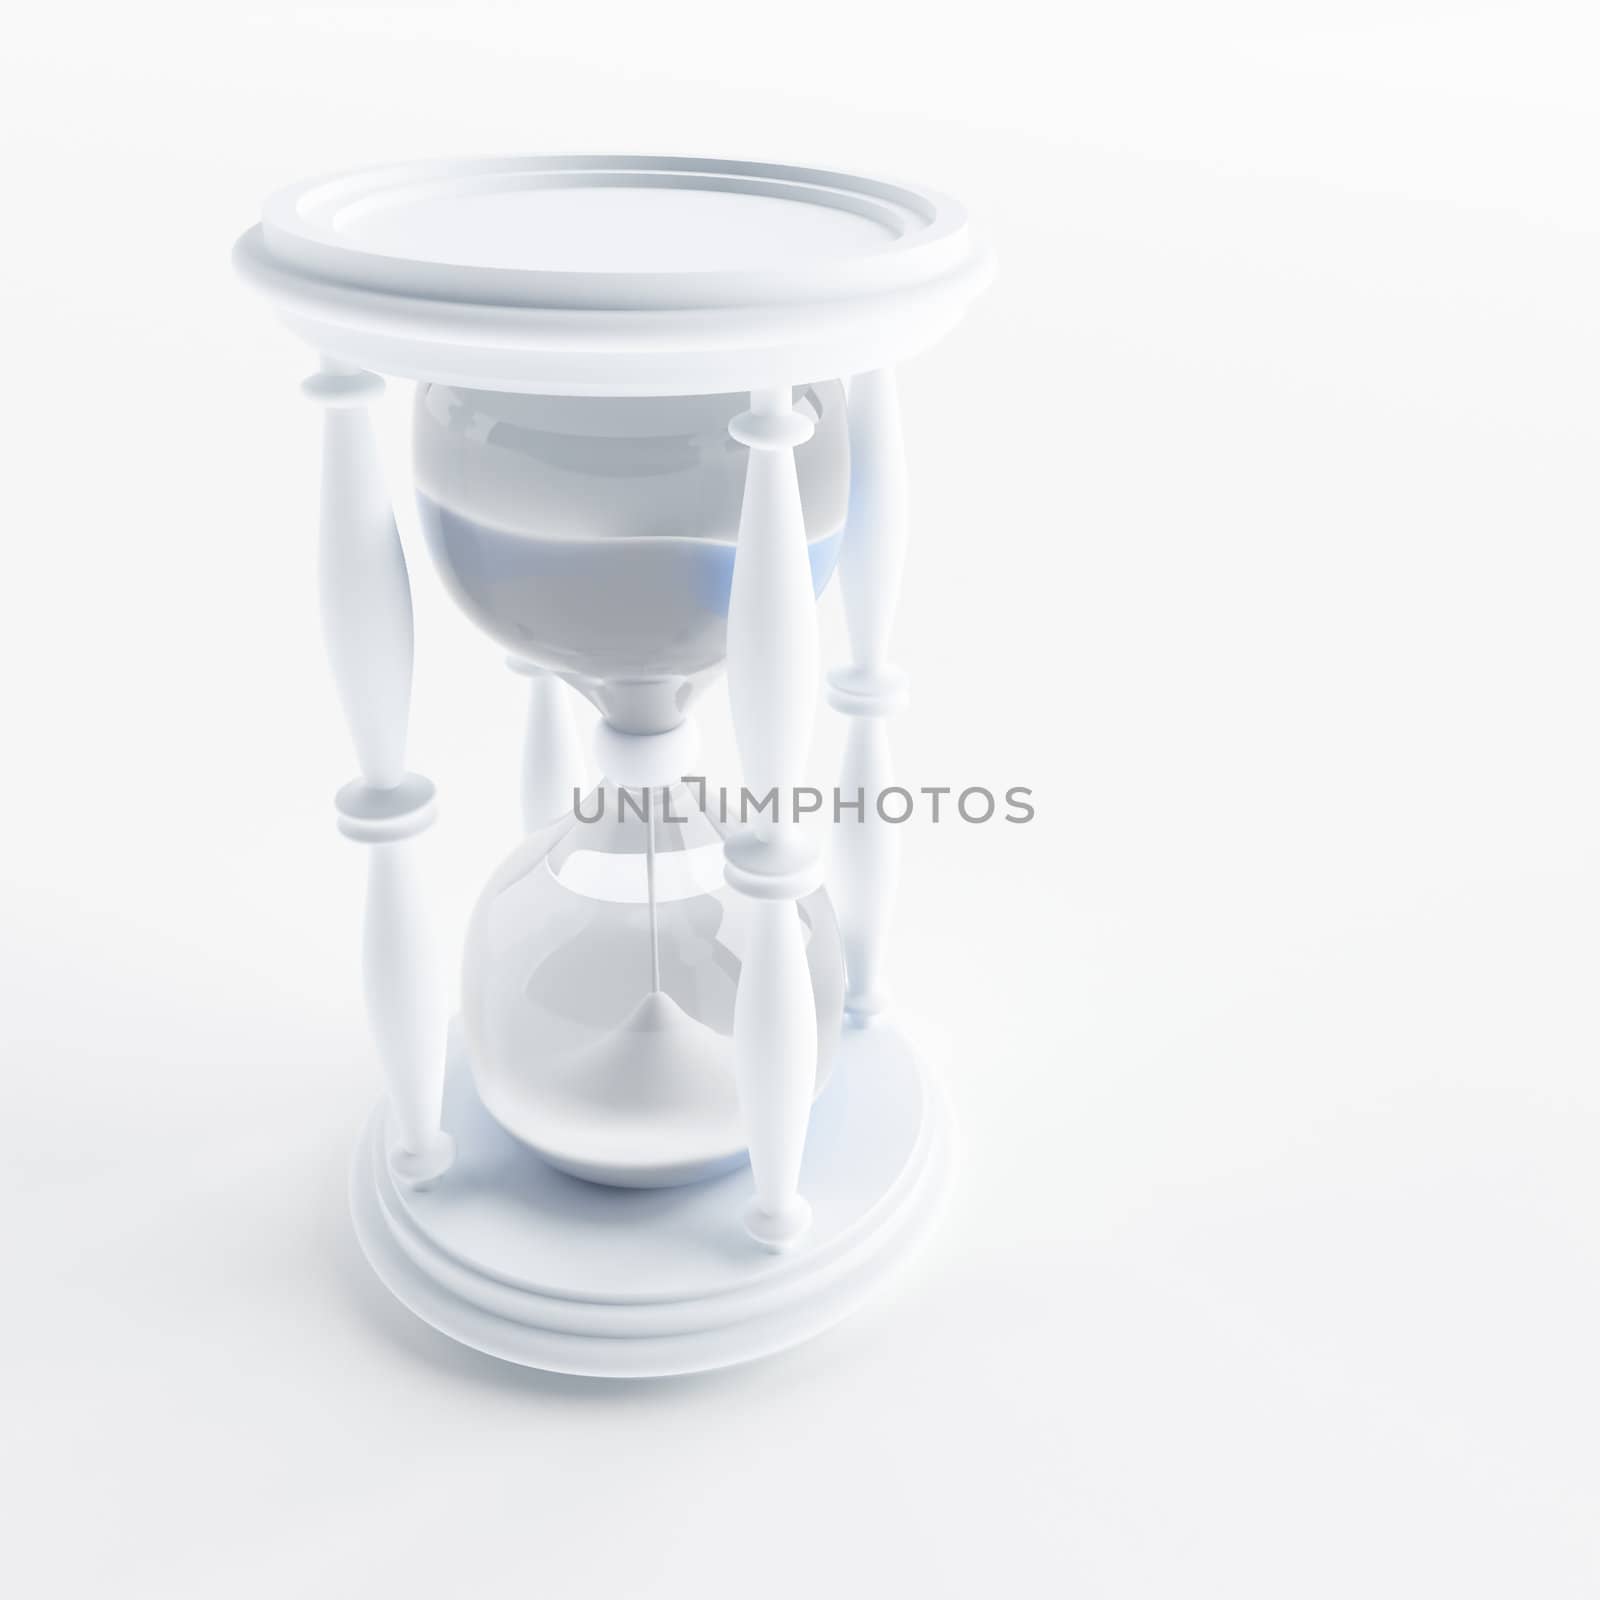 Sand-glass counts time on a white background by Serp